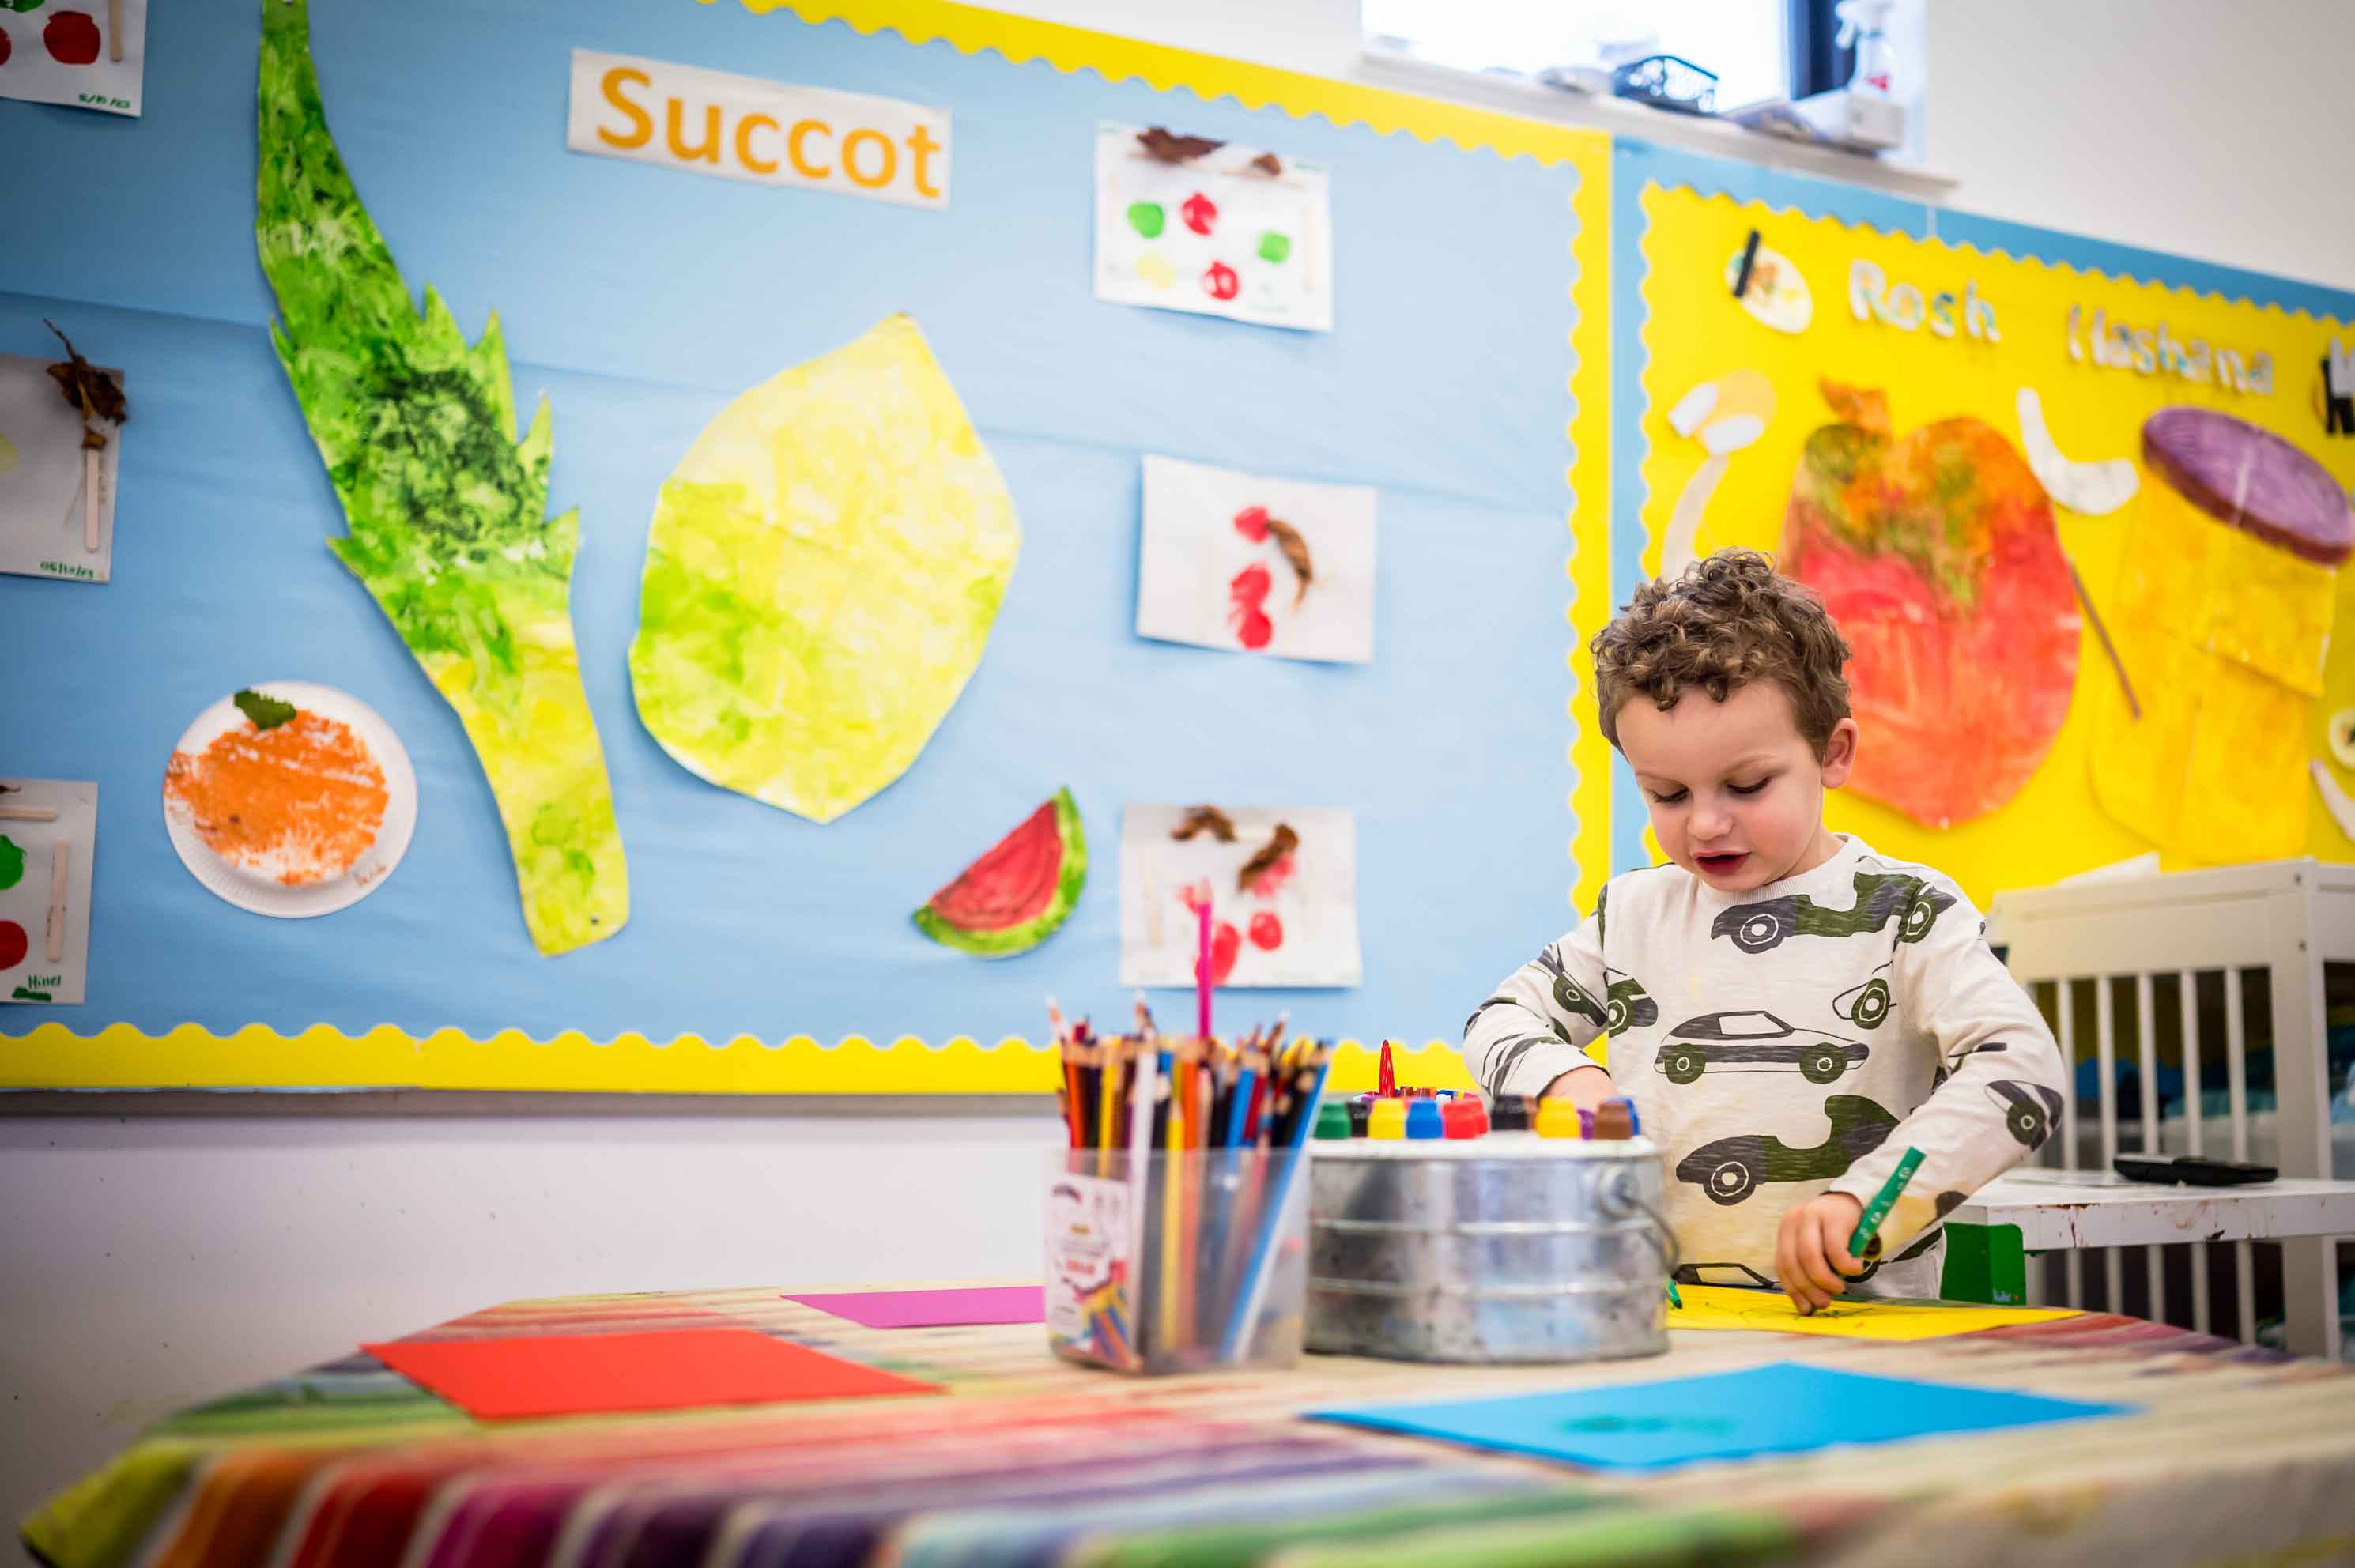 Jewish boy at a werton nursery playing with colouring, with jewish education materials in the backdrop